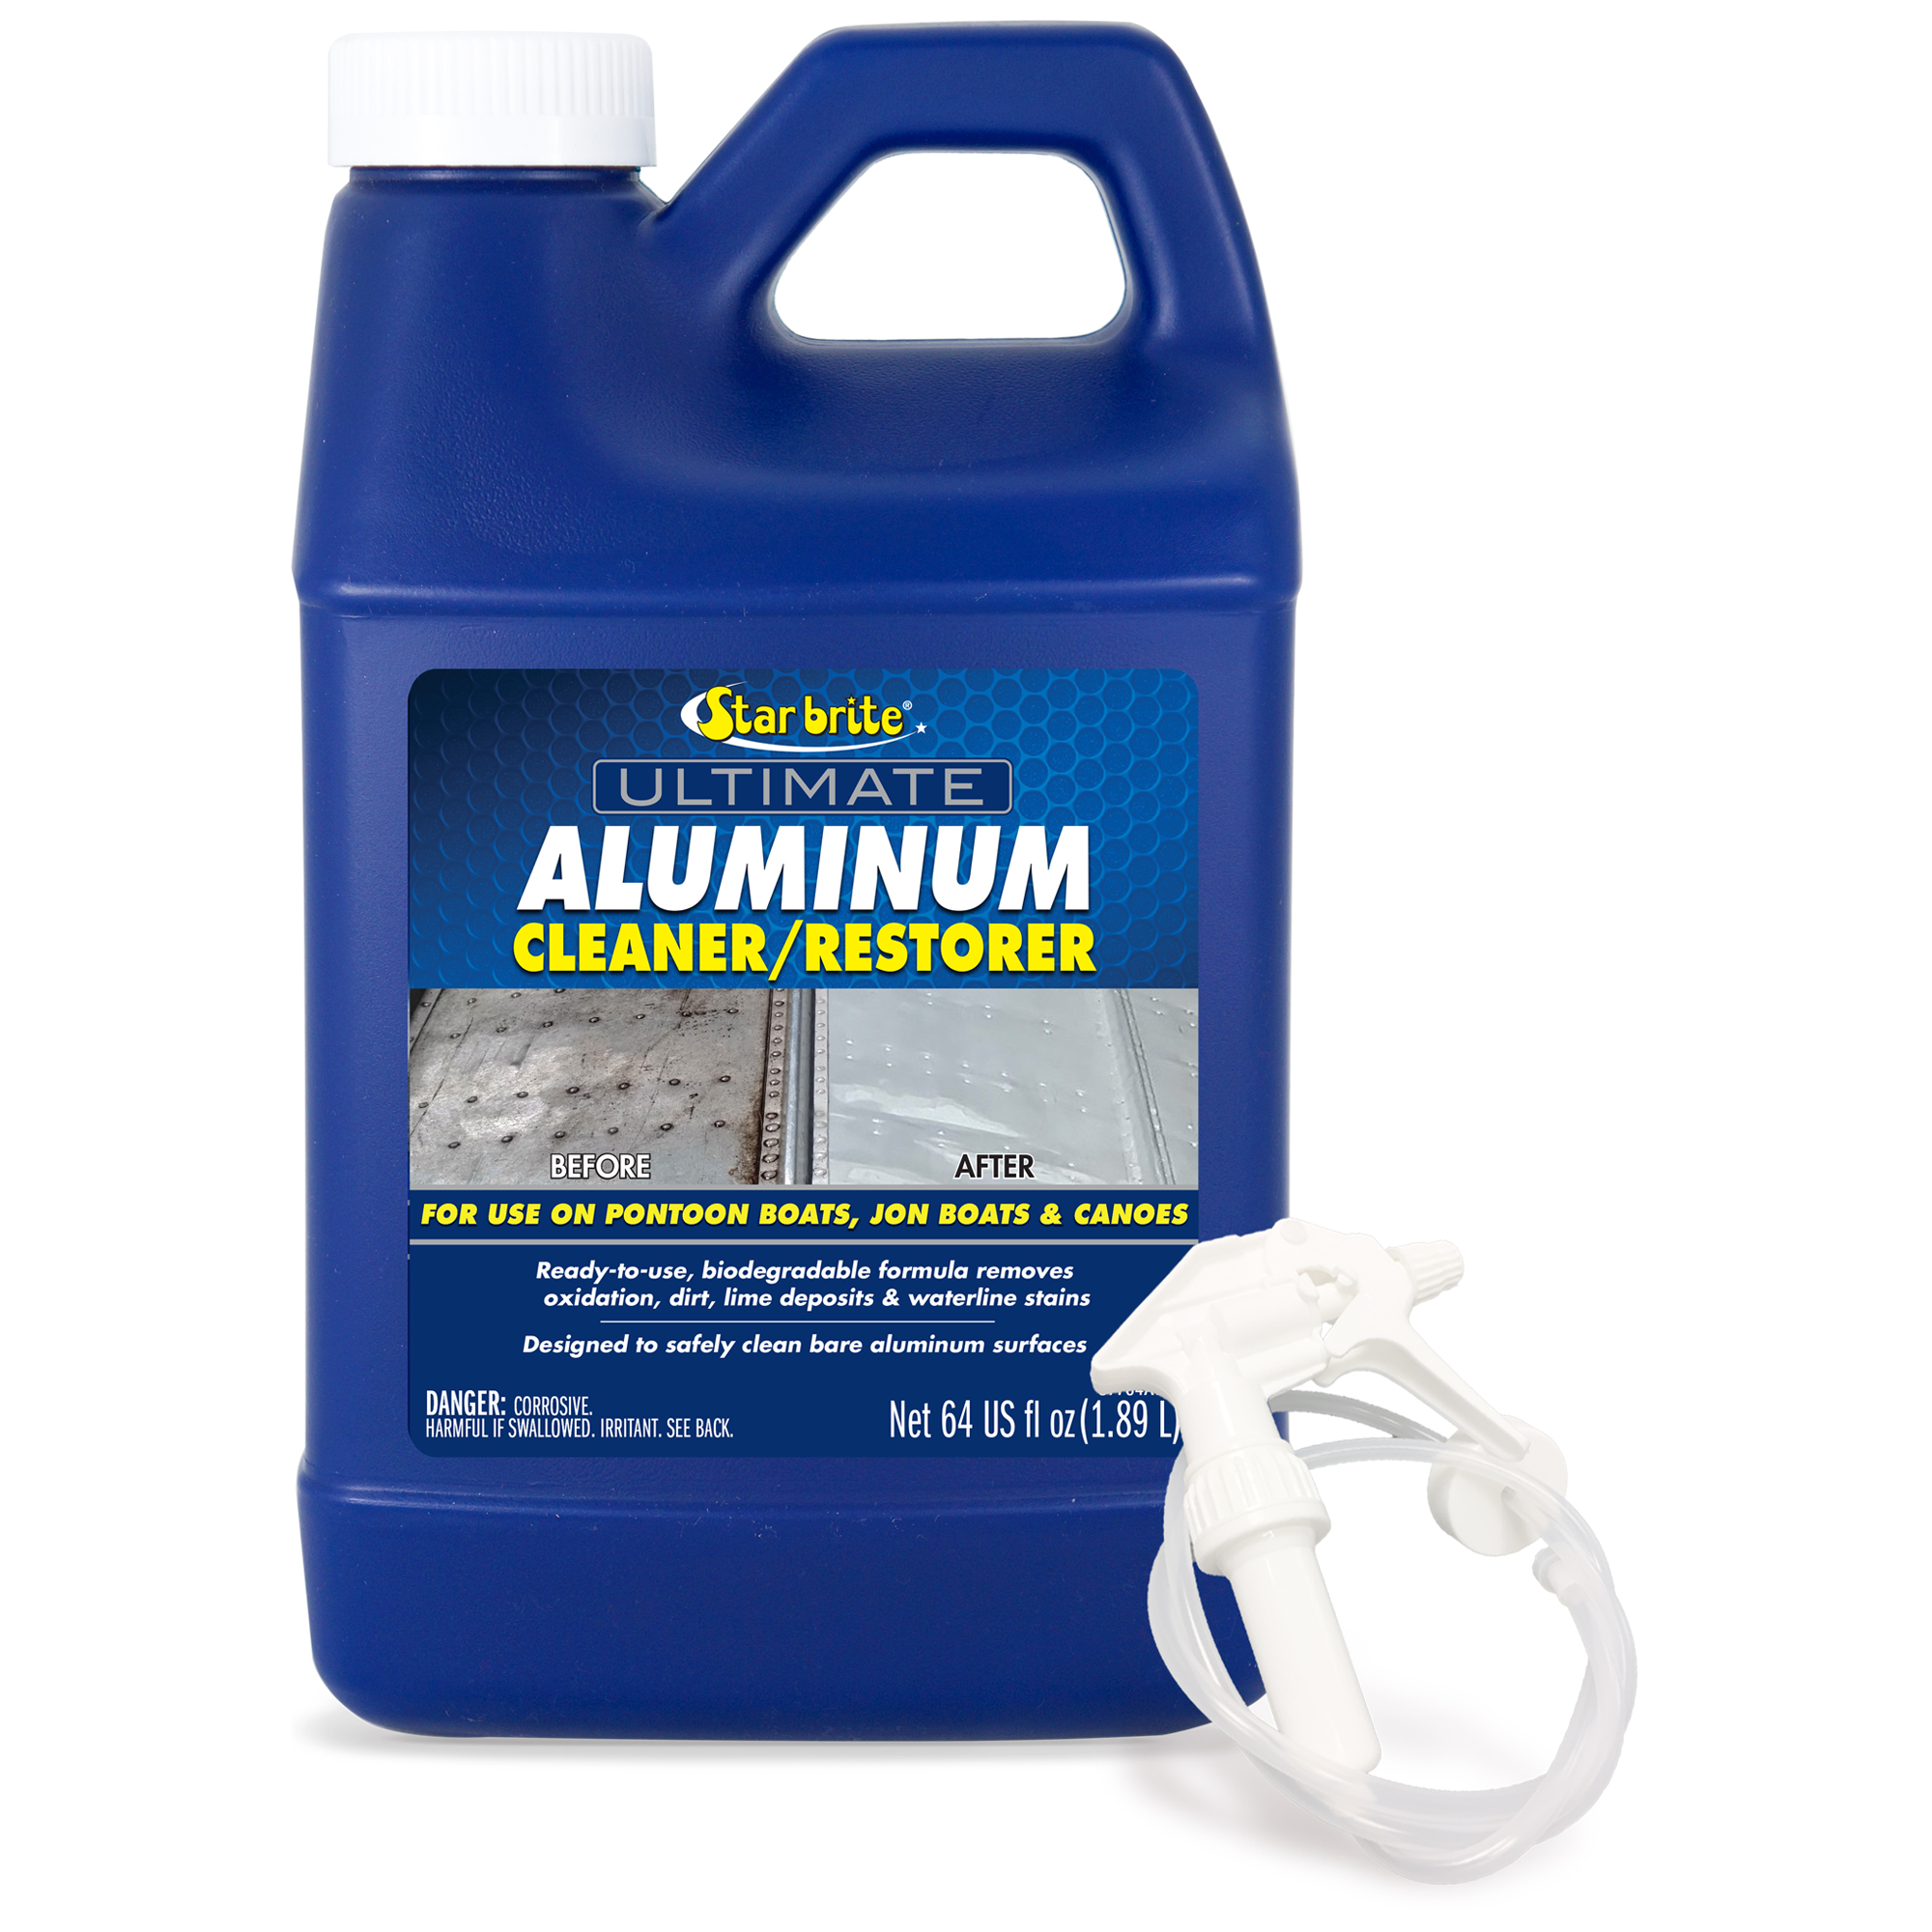 STAR BRITE Ultimate Aluminum Cleaner & Restorer - Aluminum Boat Cleaner - Perfect for Pontoon Boats, Jon Boats & Canoes (NO SPRAYER) - 64 OZ (087764) - image 1 of 4